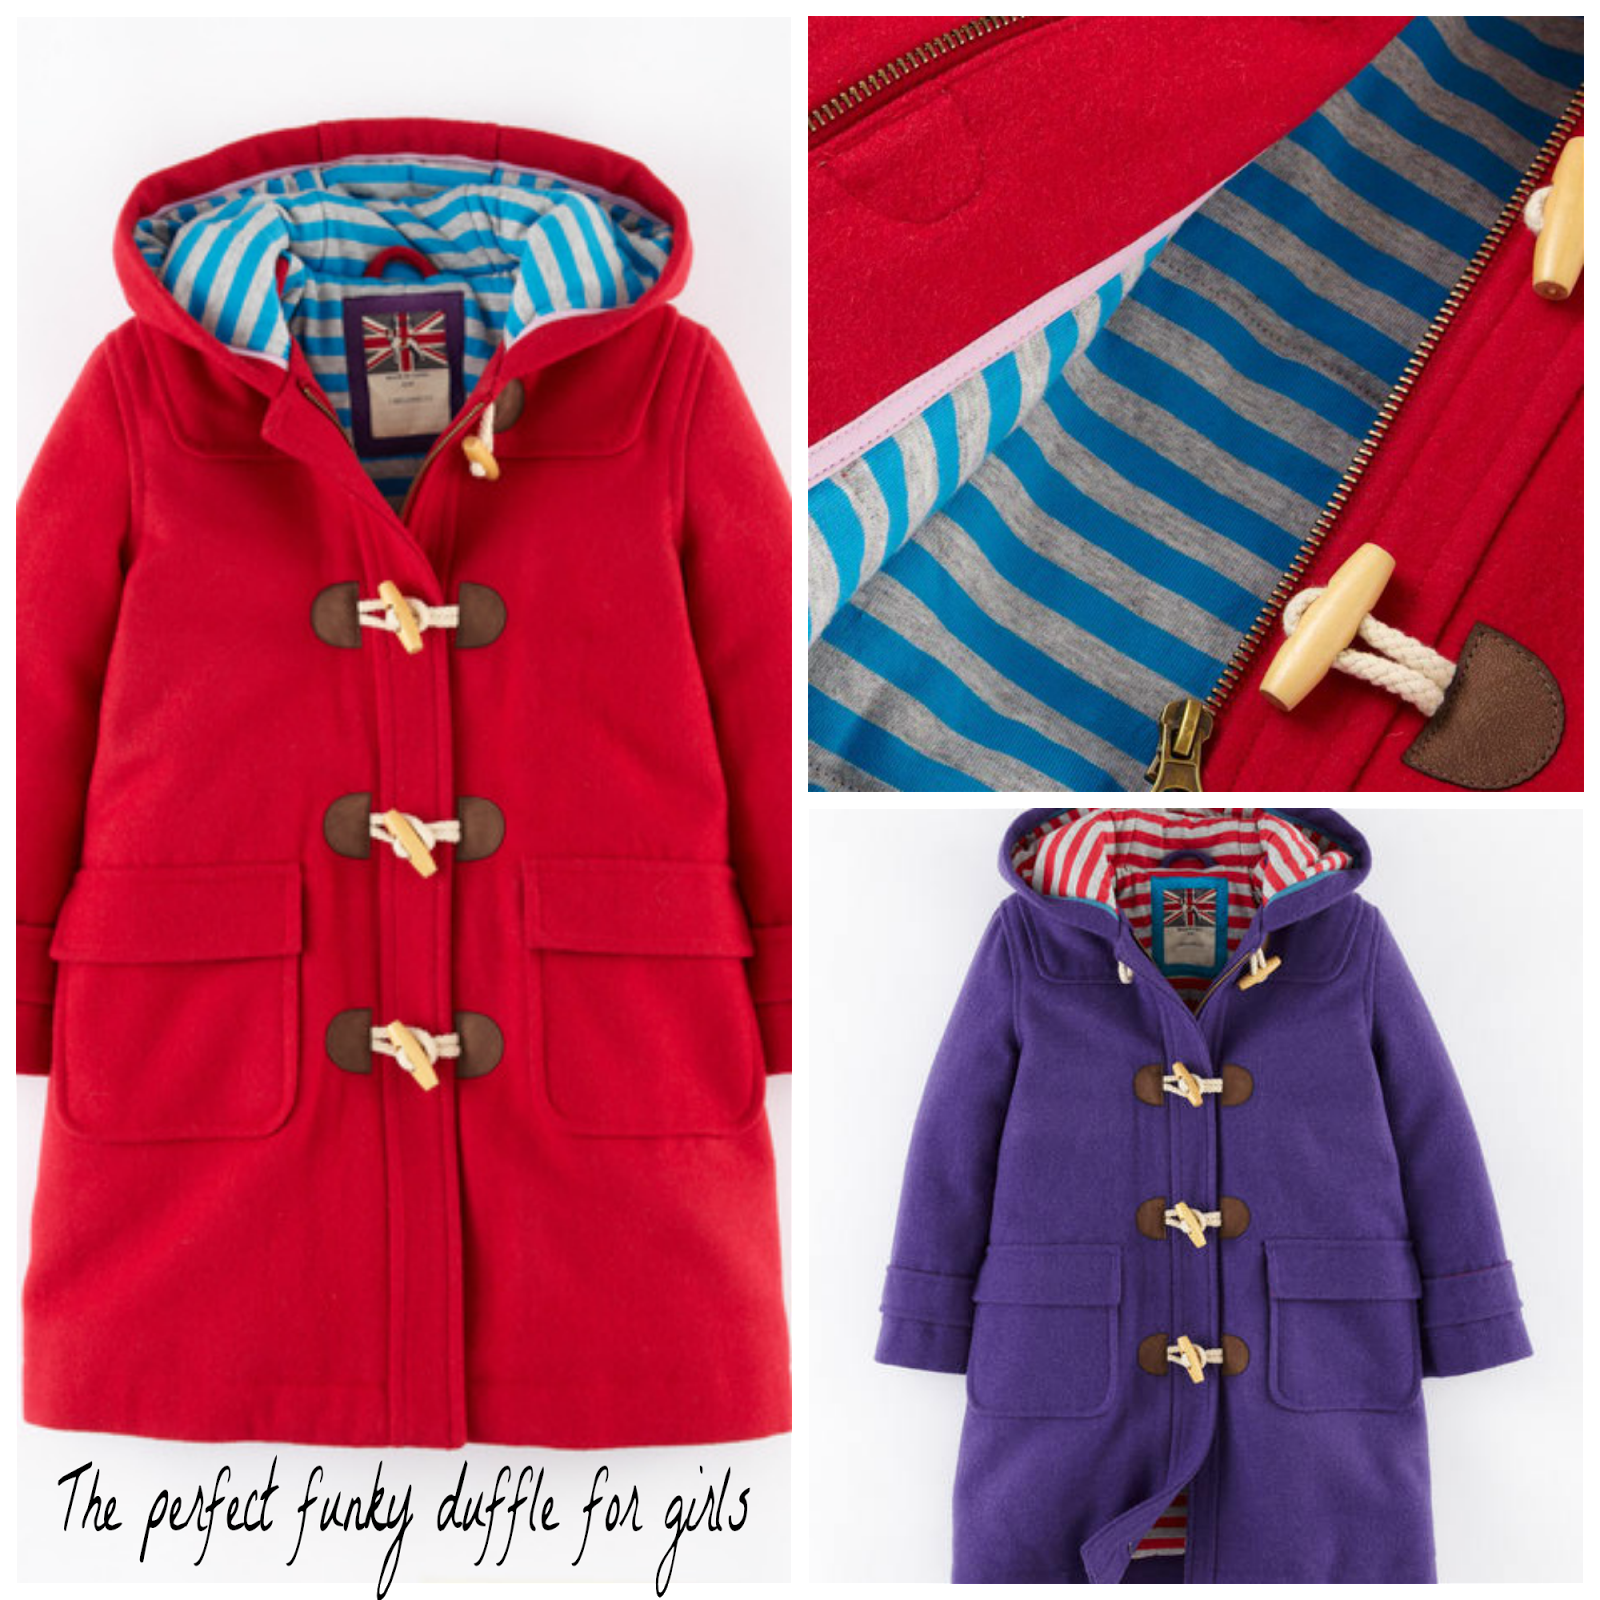 The Perfect Bright Winter Duffle Coat for Girls | Evans-Crittens